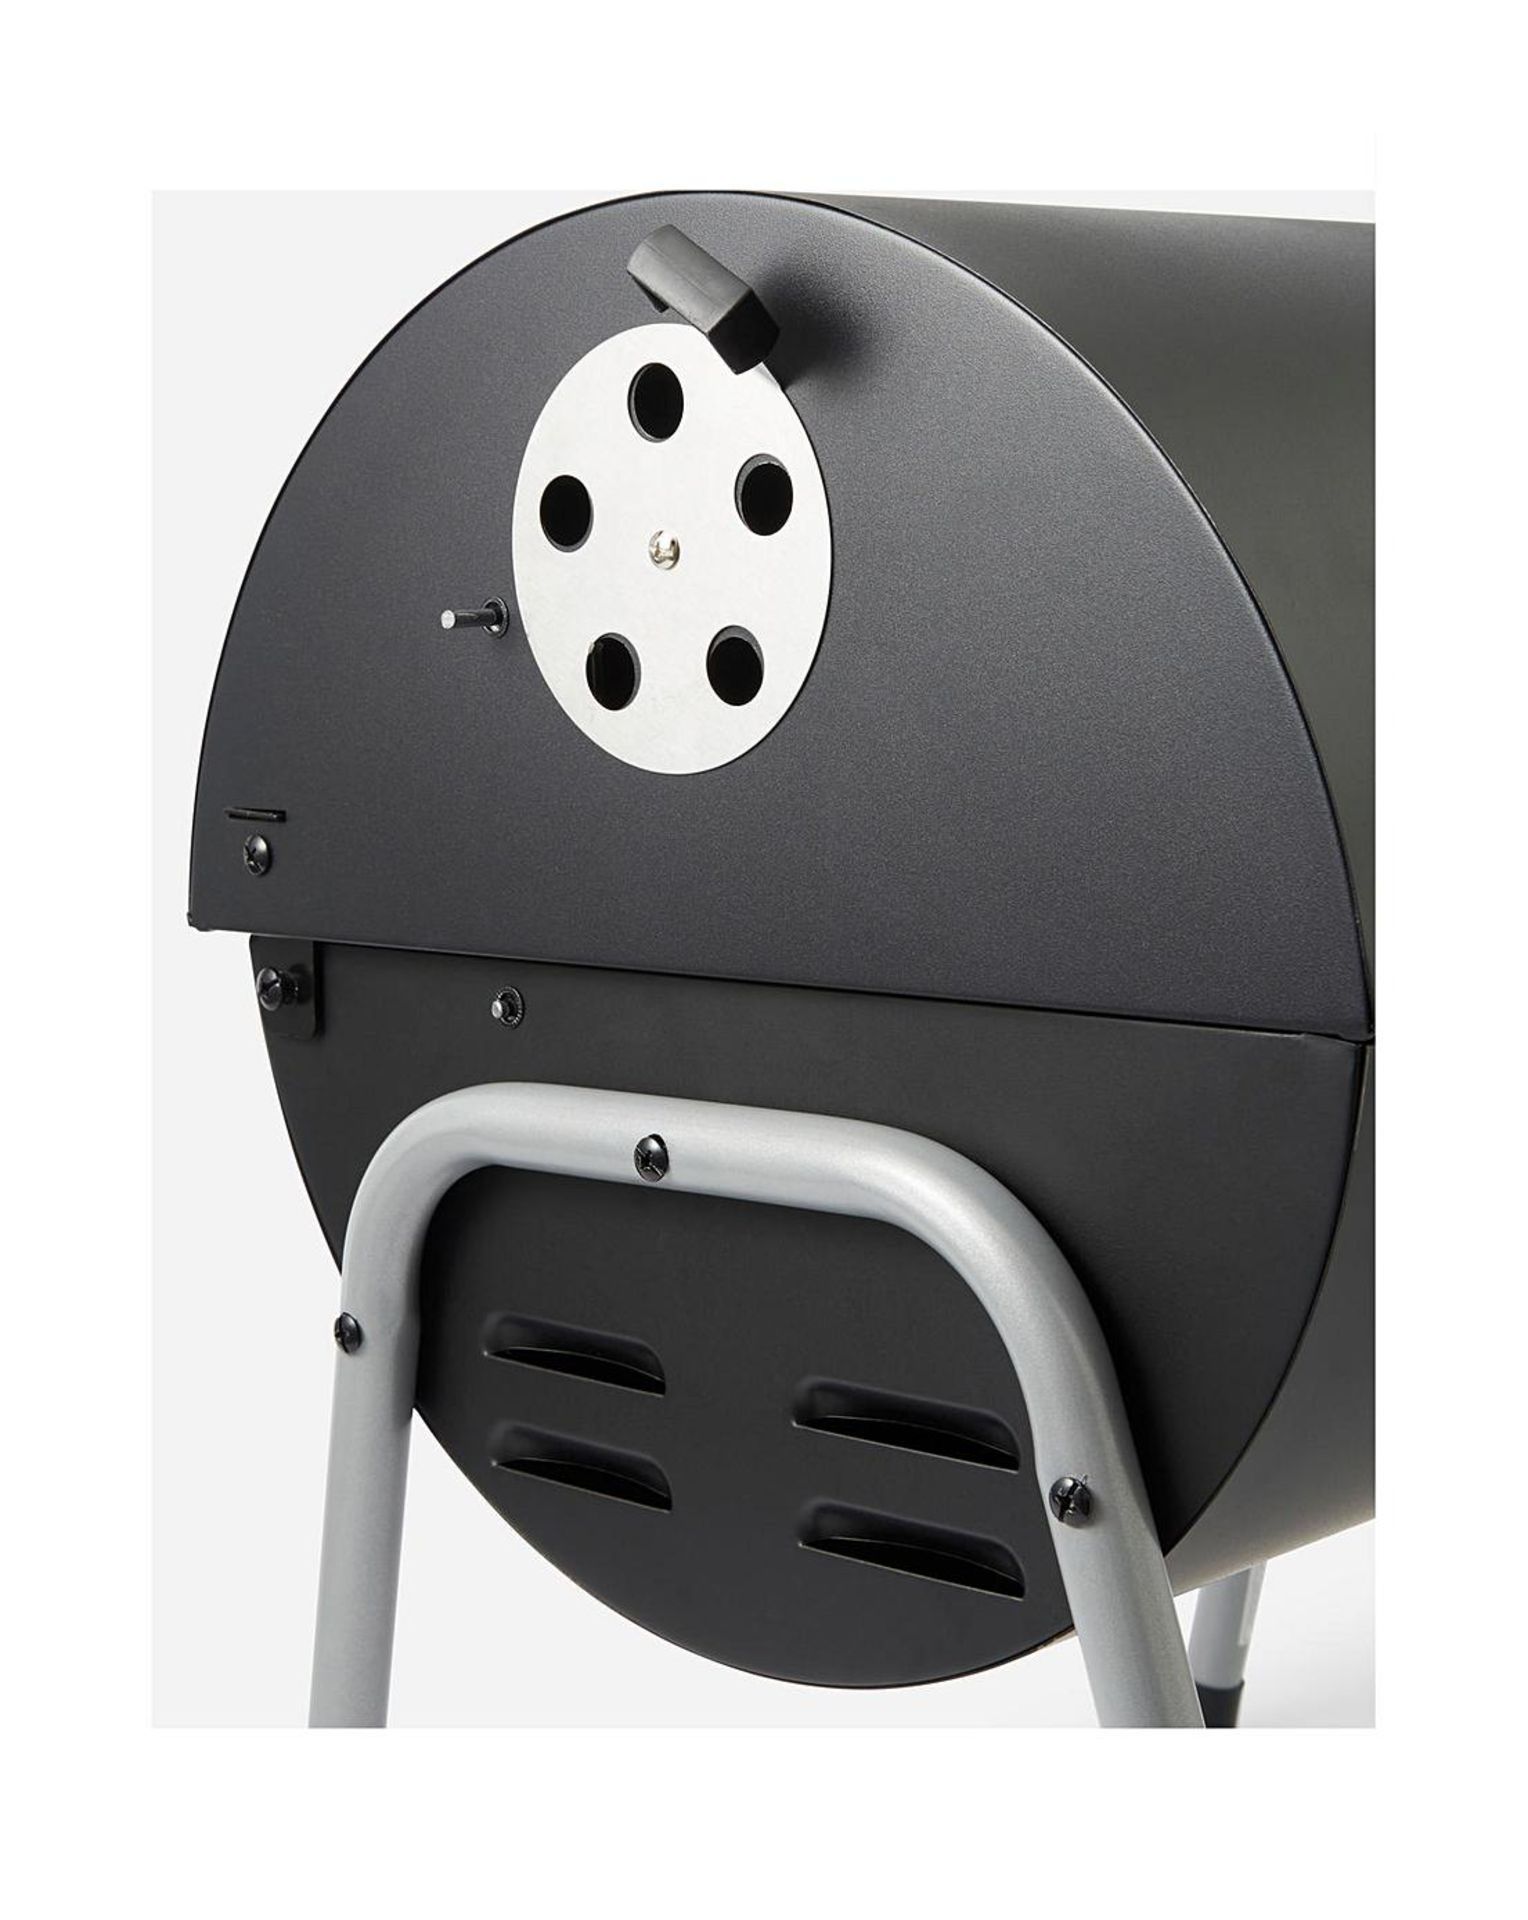 BRAND NEW CHARCOAL OIL DRUM BBQ R15-5 - Image 4 of 4